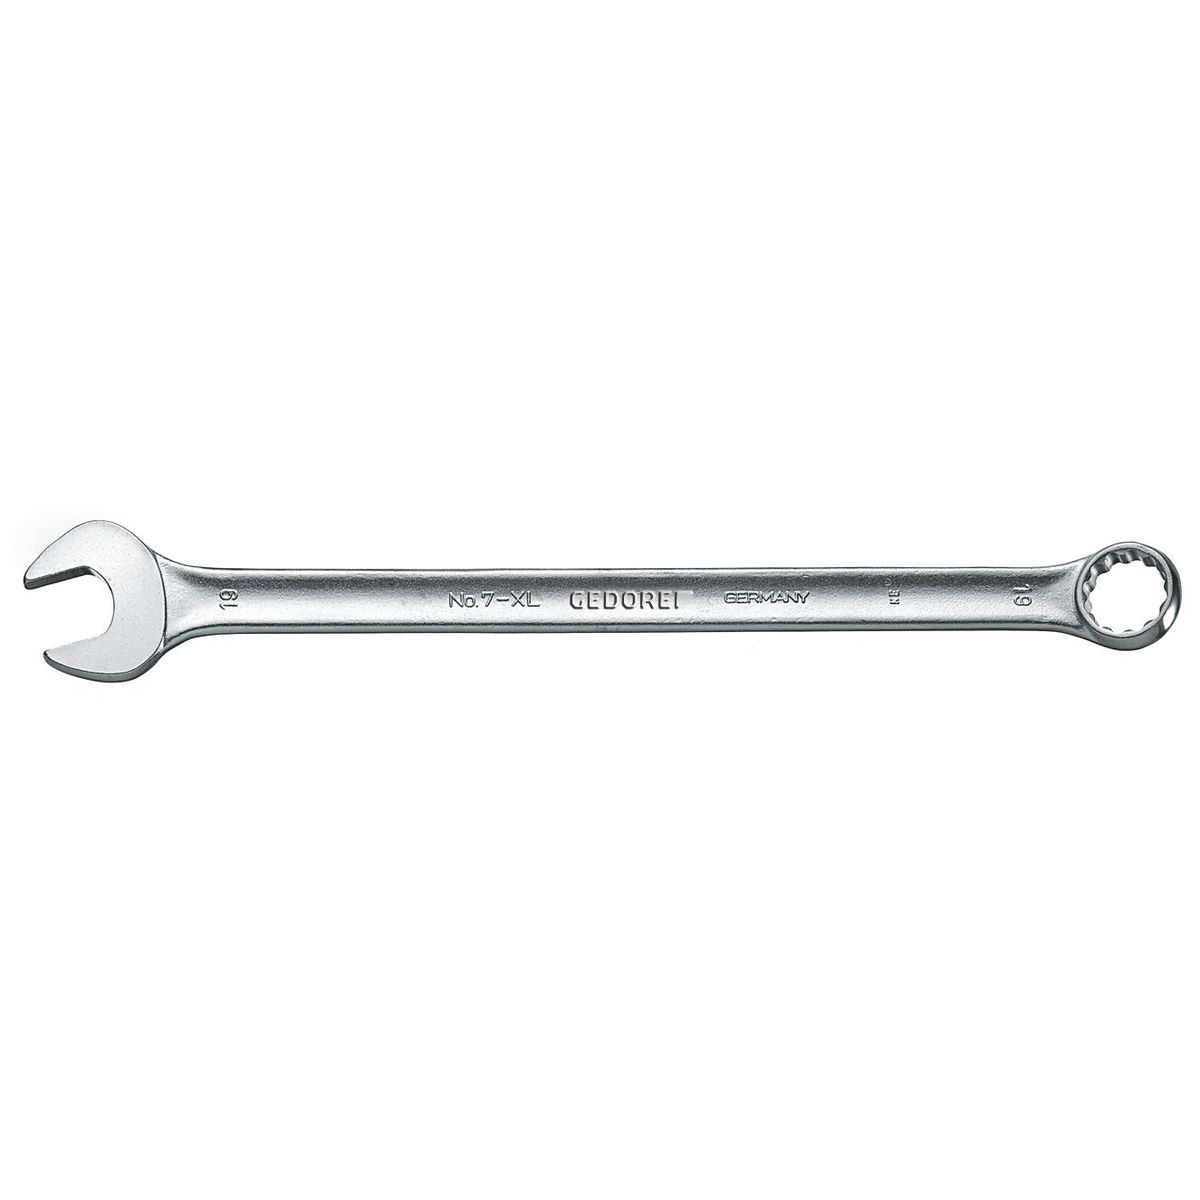 Combination spanner, extra long 17mm No.7 XL 17 Gedore